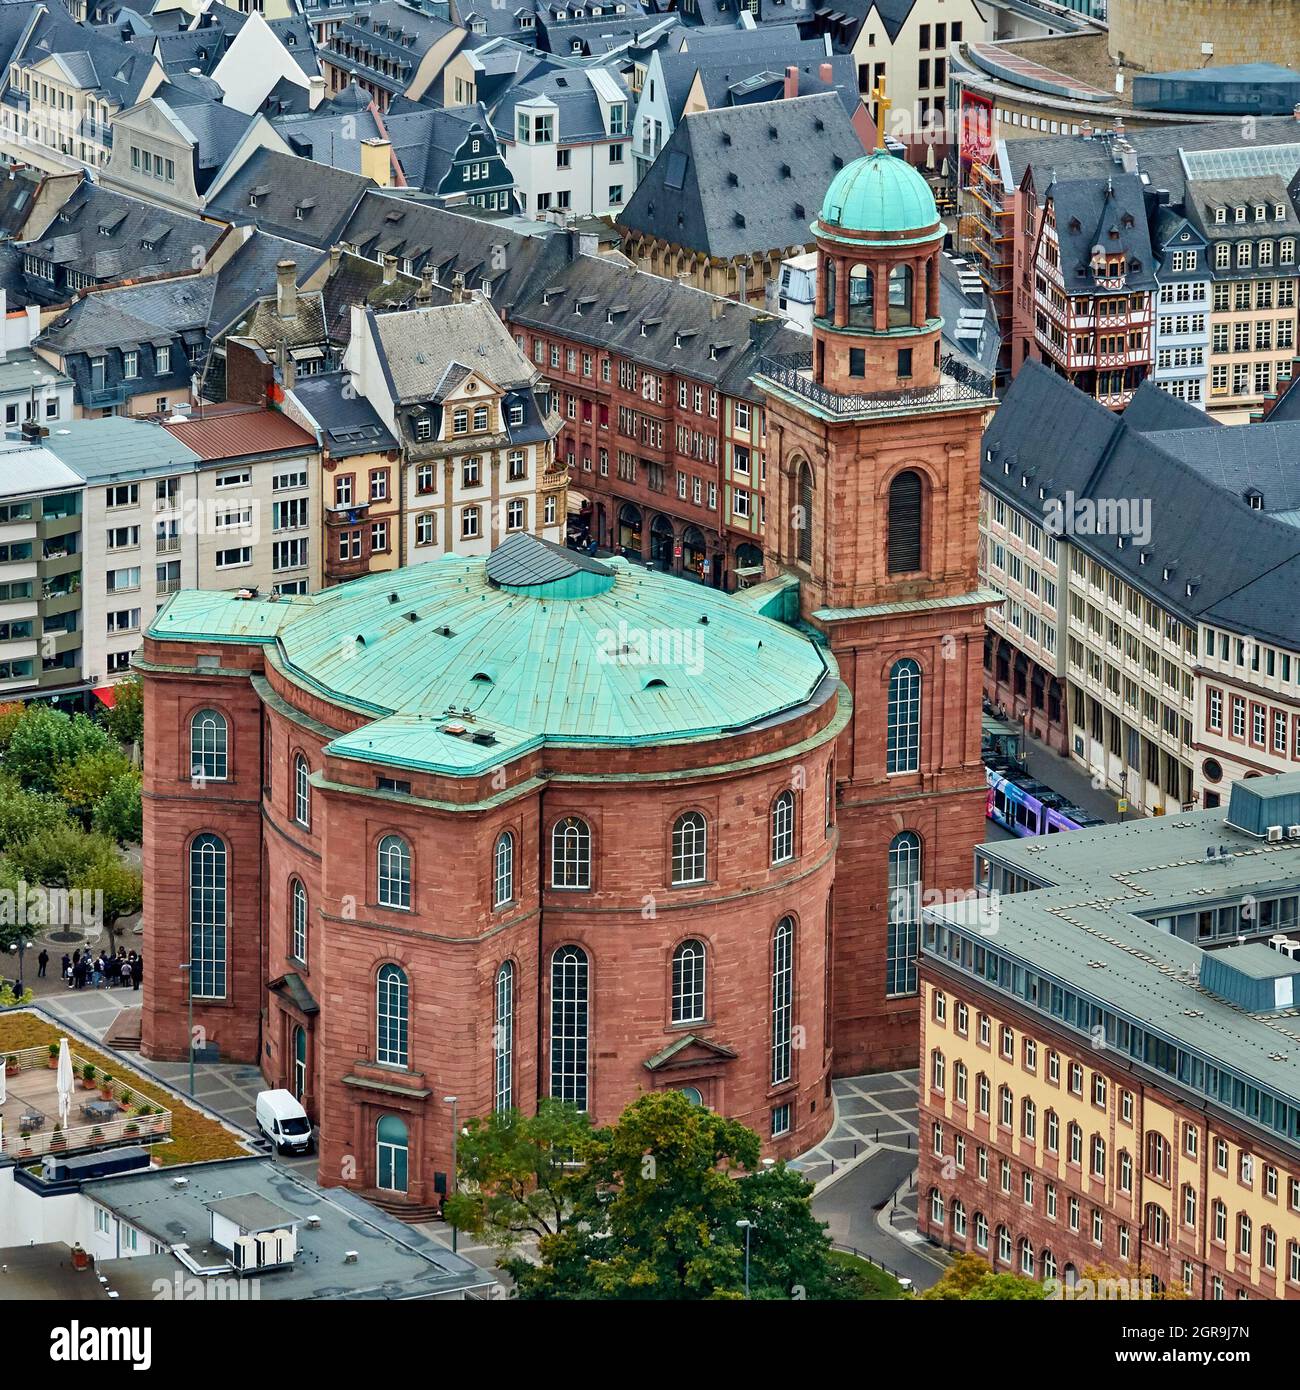 Frankfurt, Germany, The Paulskirche With The Green Roof Of Copper Plates In  The City Centre Stock Photo - Alamy